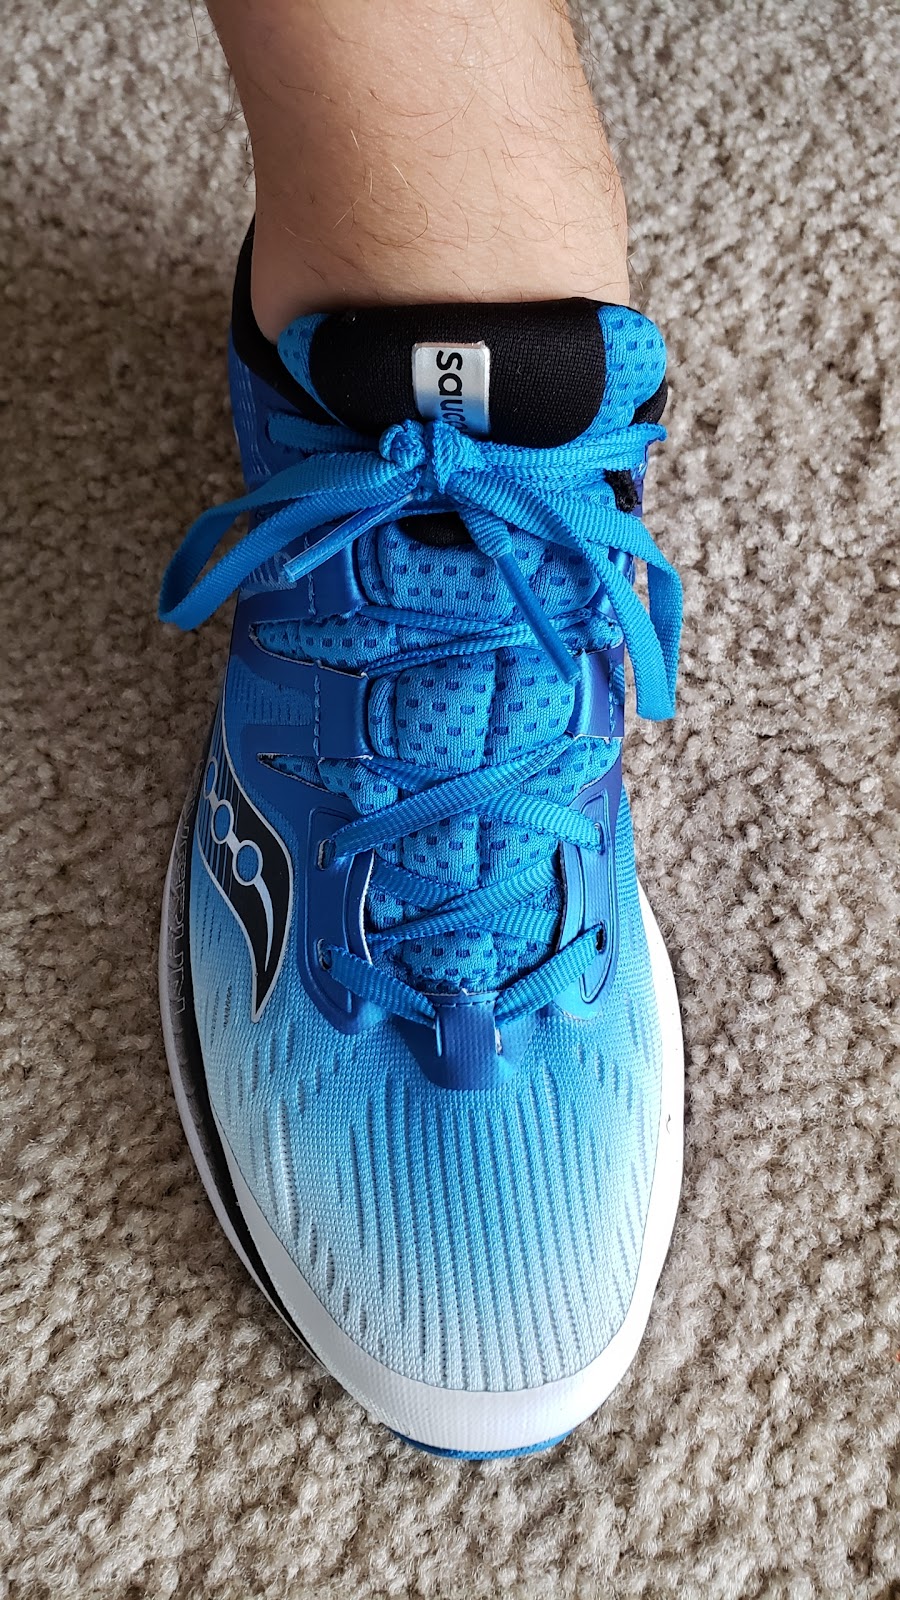 Road Trail Run: Saucony Ride ISO Review: The ride improves yet again! The  upper challenges.